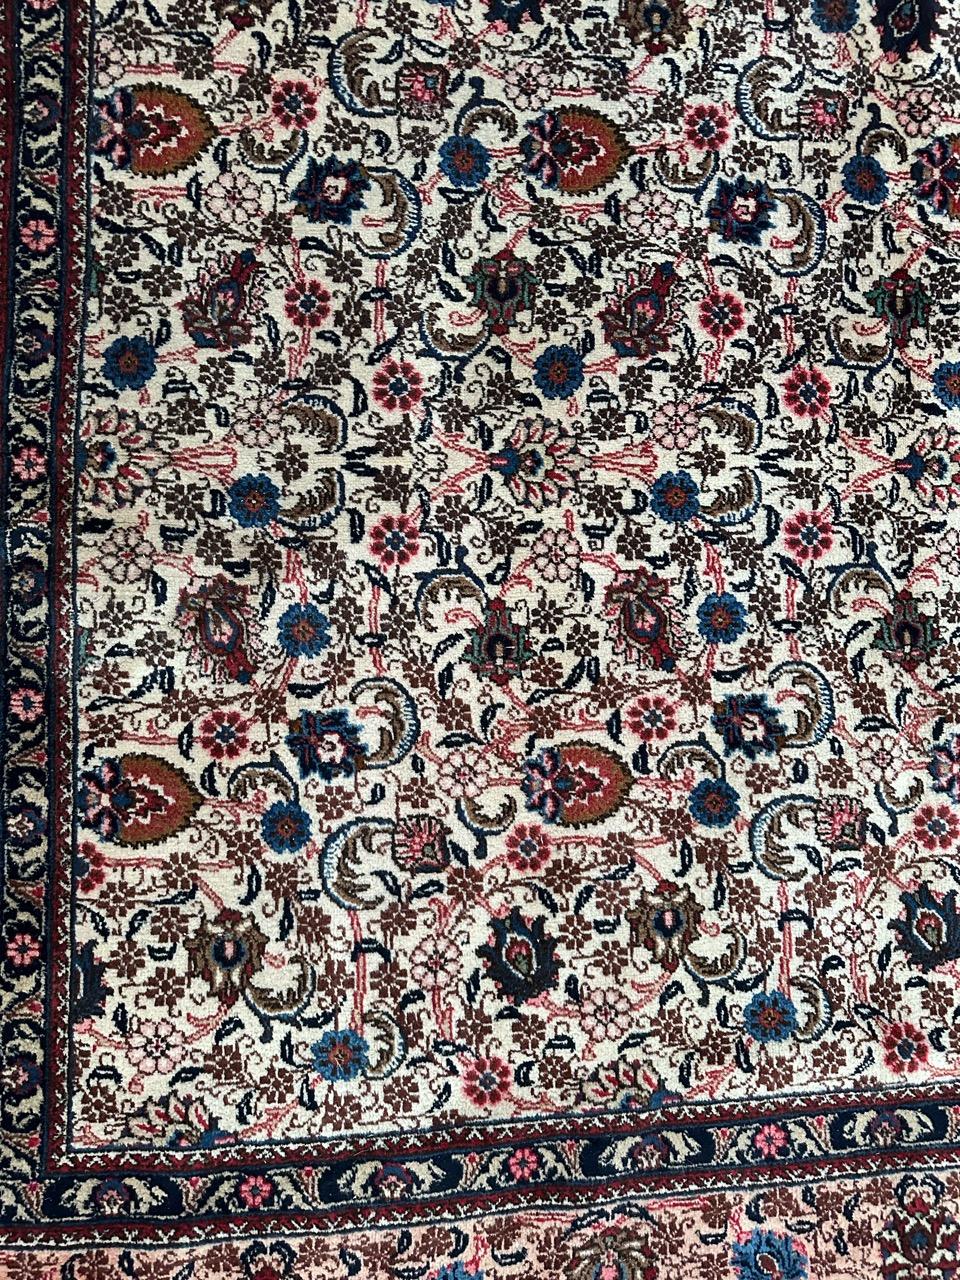 Discover the timeless elegance of our large mid-century Mashhad rug! Adorned with a beautiful floral design in vibrant colors such as orange, pink, red, blue, green, and brown, this hand-knotted masterpiece features wool velvet on a cotton